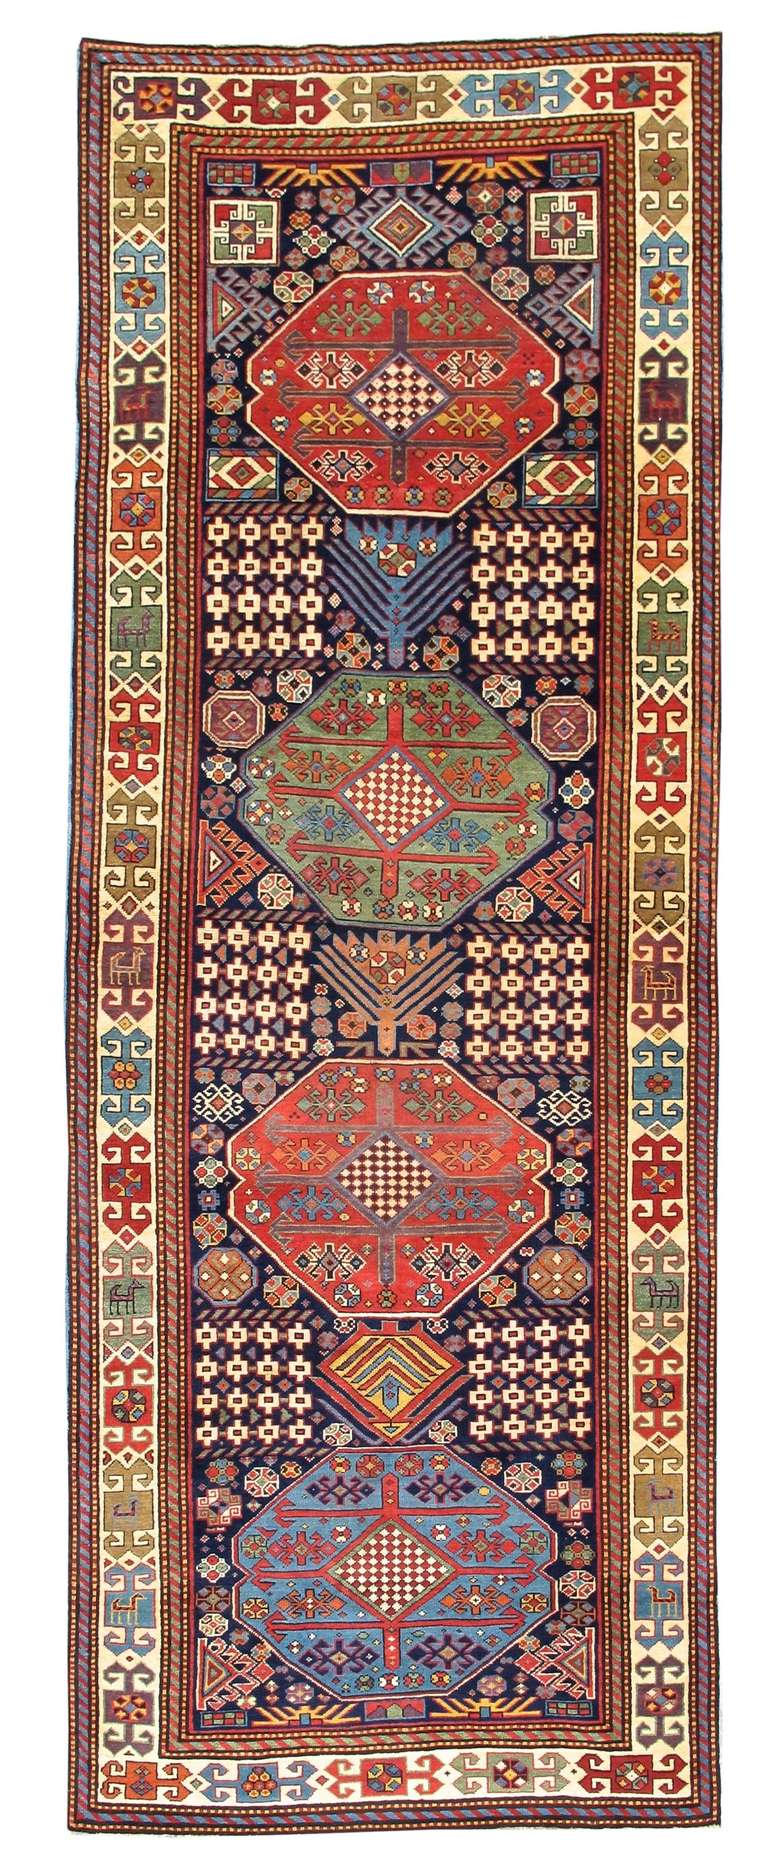 This Akstafa long rug is a perfect example of the free spirit which imbues great Caucasian village weaving. A row of large colorful medallions, each resembling tremendous floral bursts is drawn incorporating latch-hooks, checkered diamonds and the